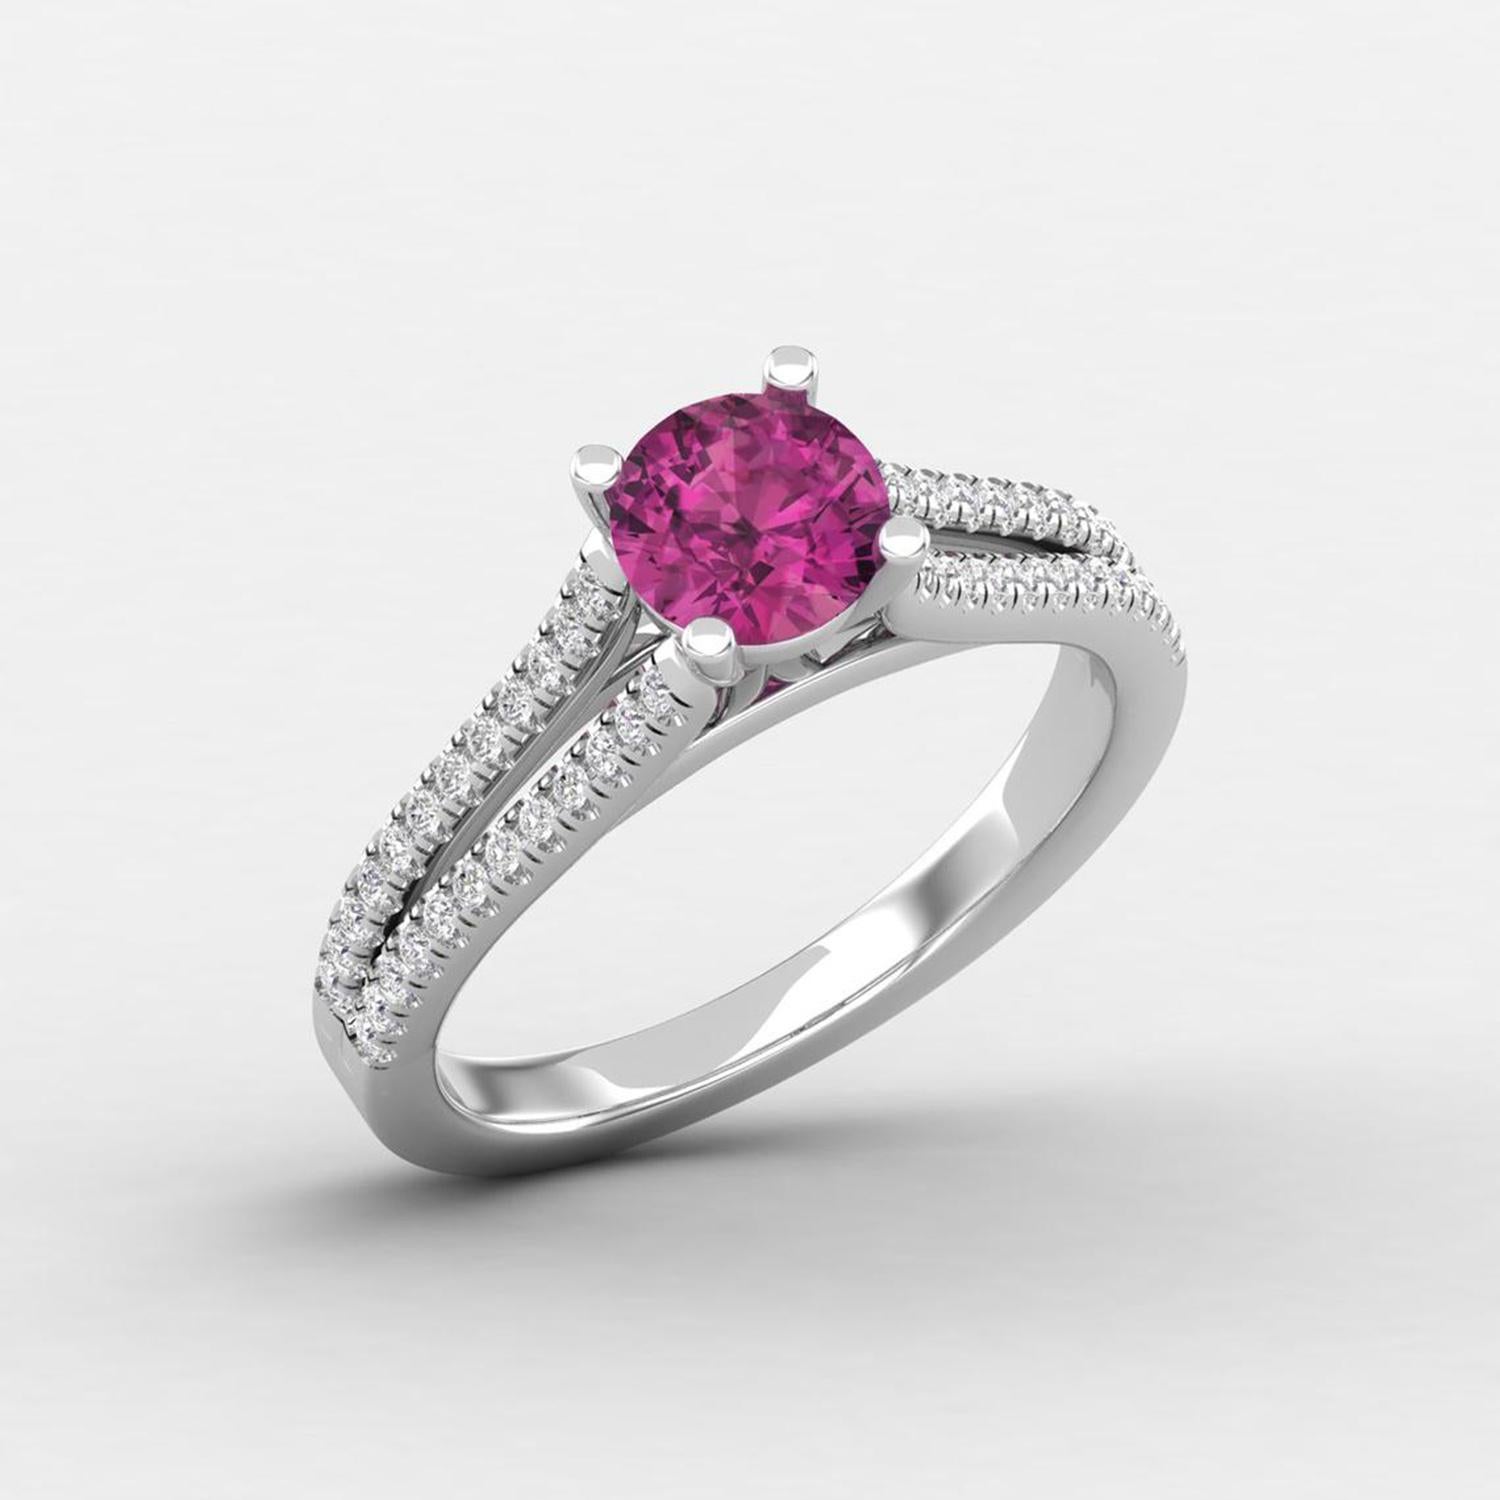 Modern 14 K Gold Rubellite Tourmaline Ring / Diamond Solitaire Ring / Ring for Her For Sale